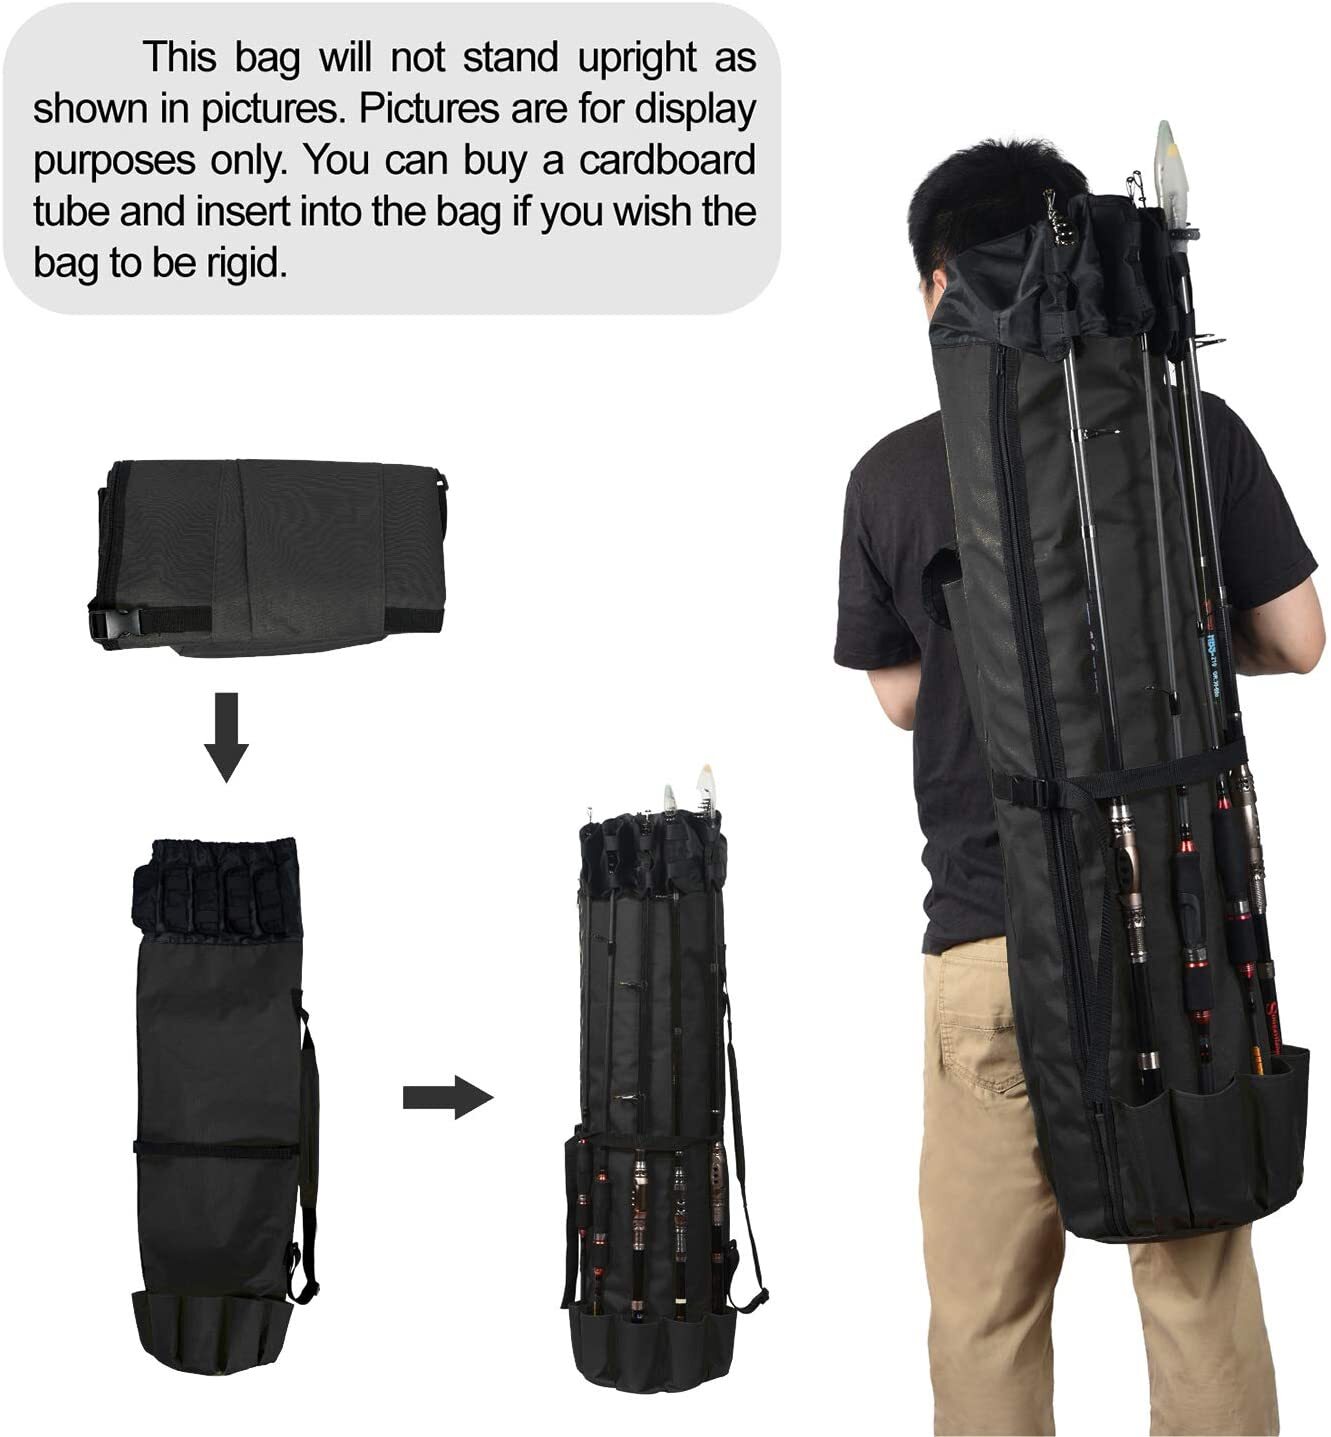 fishing rod carry bag products for sale